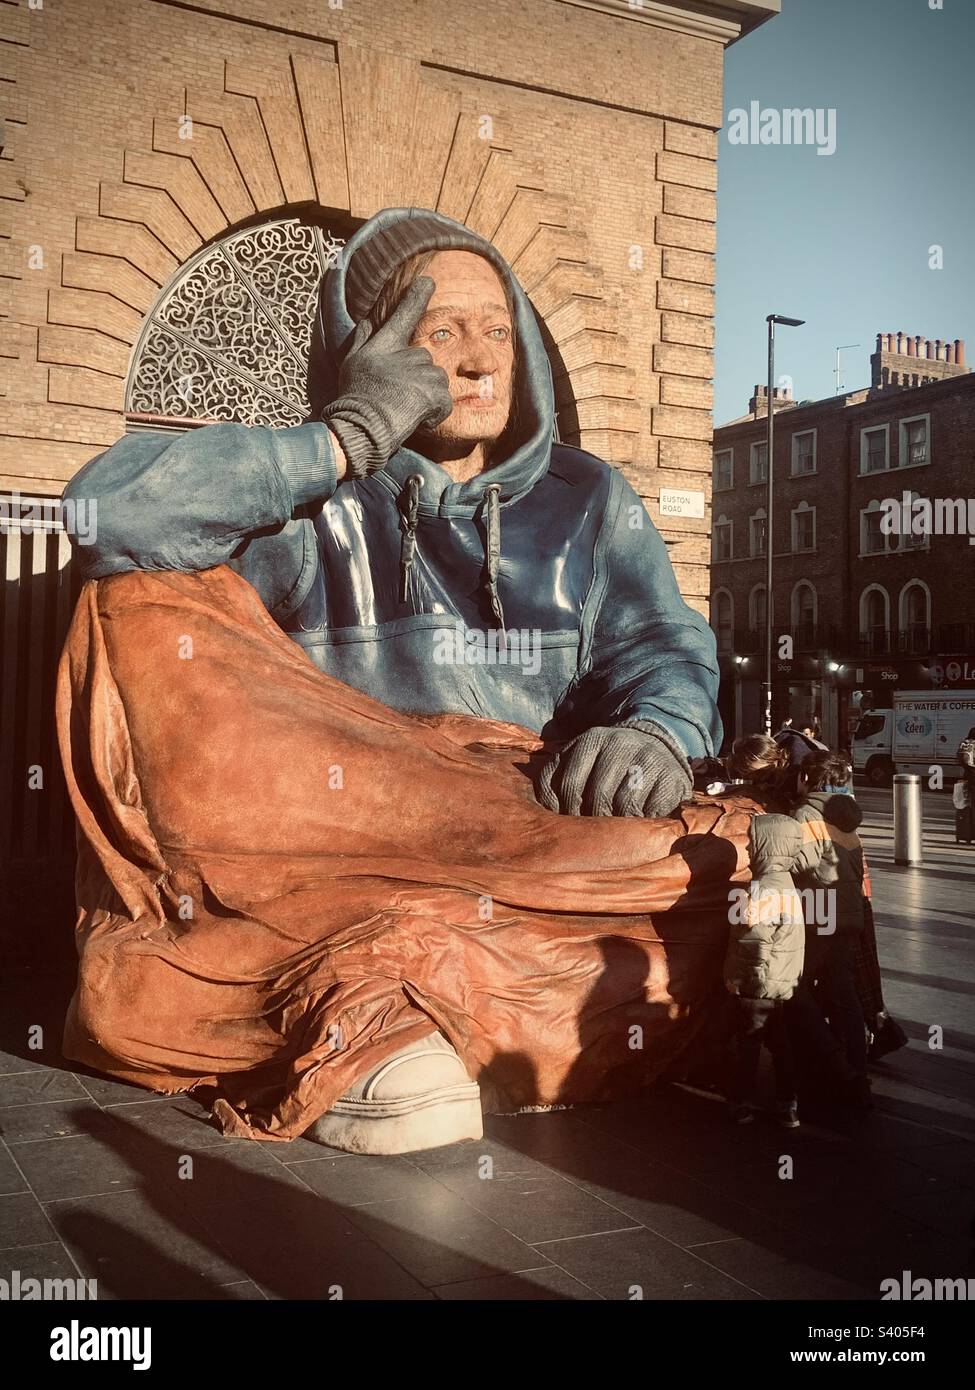 Crisis charity homeless statue at Kings Cross Station 6/12/22. Stating homelessness can not be ignored any longer Stock Photo